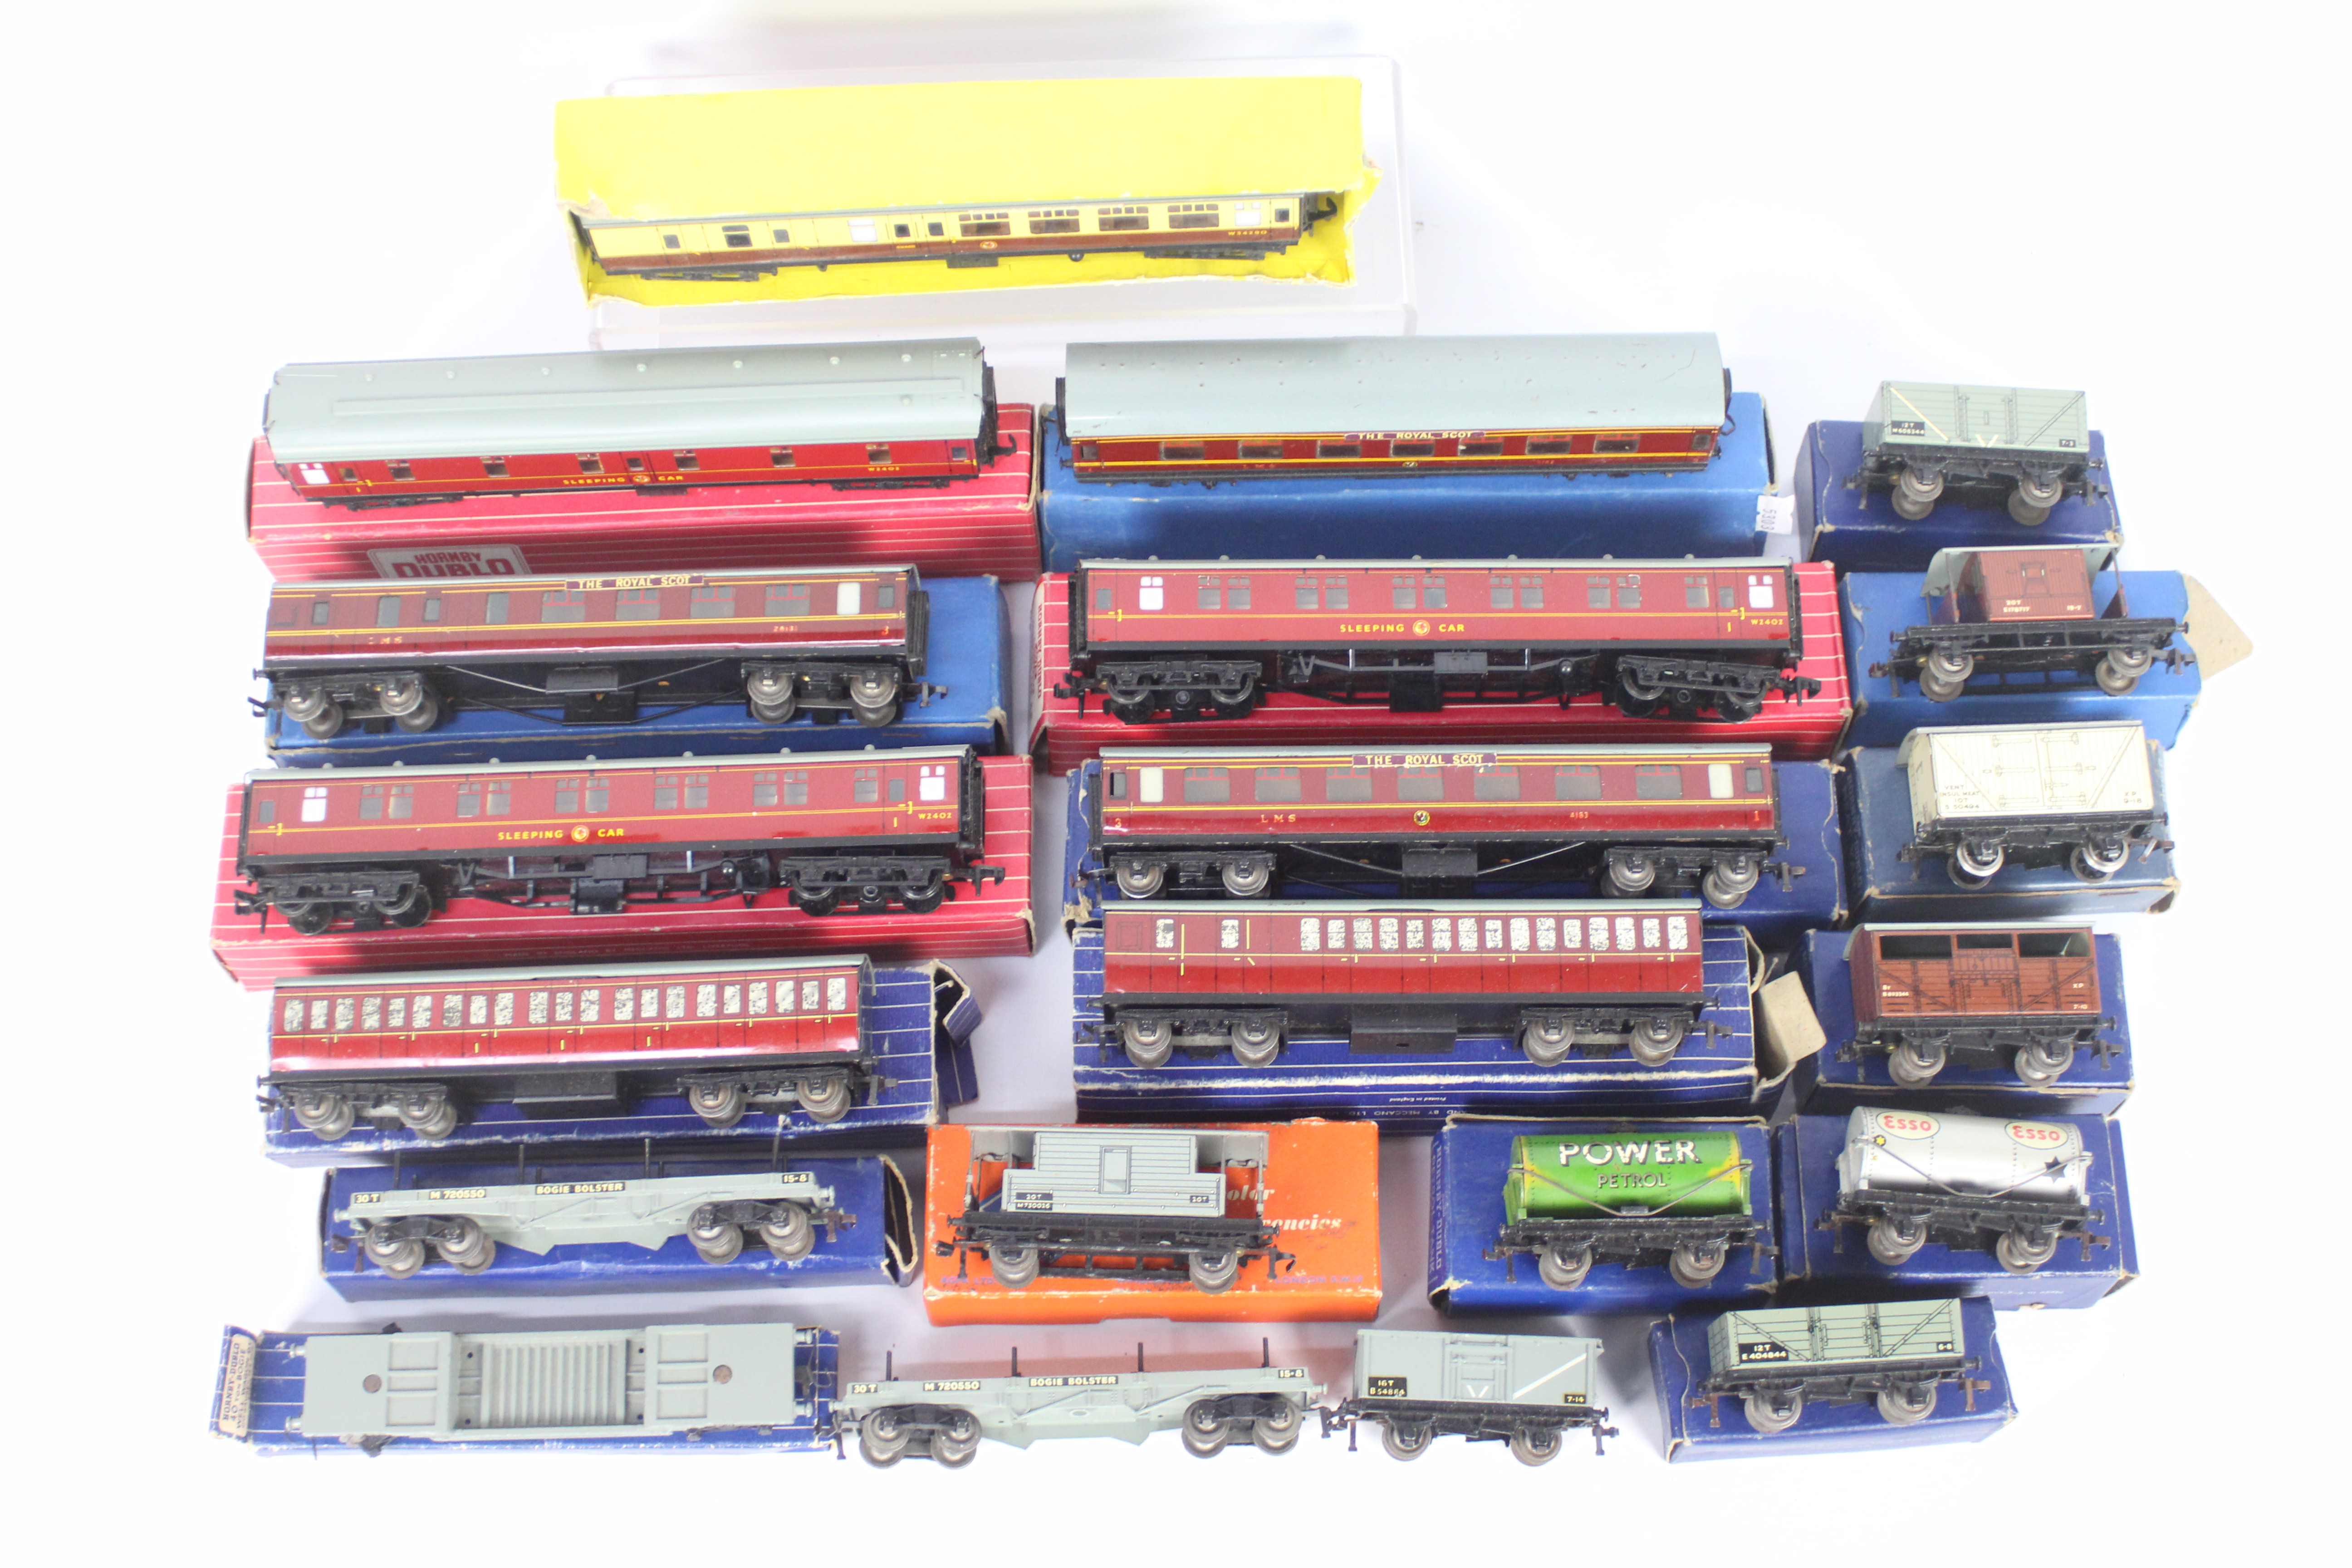 Hornby Dublo - A siding of over 20 predominately boxed Hornby Dublo passenger and freight rolling